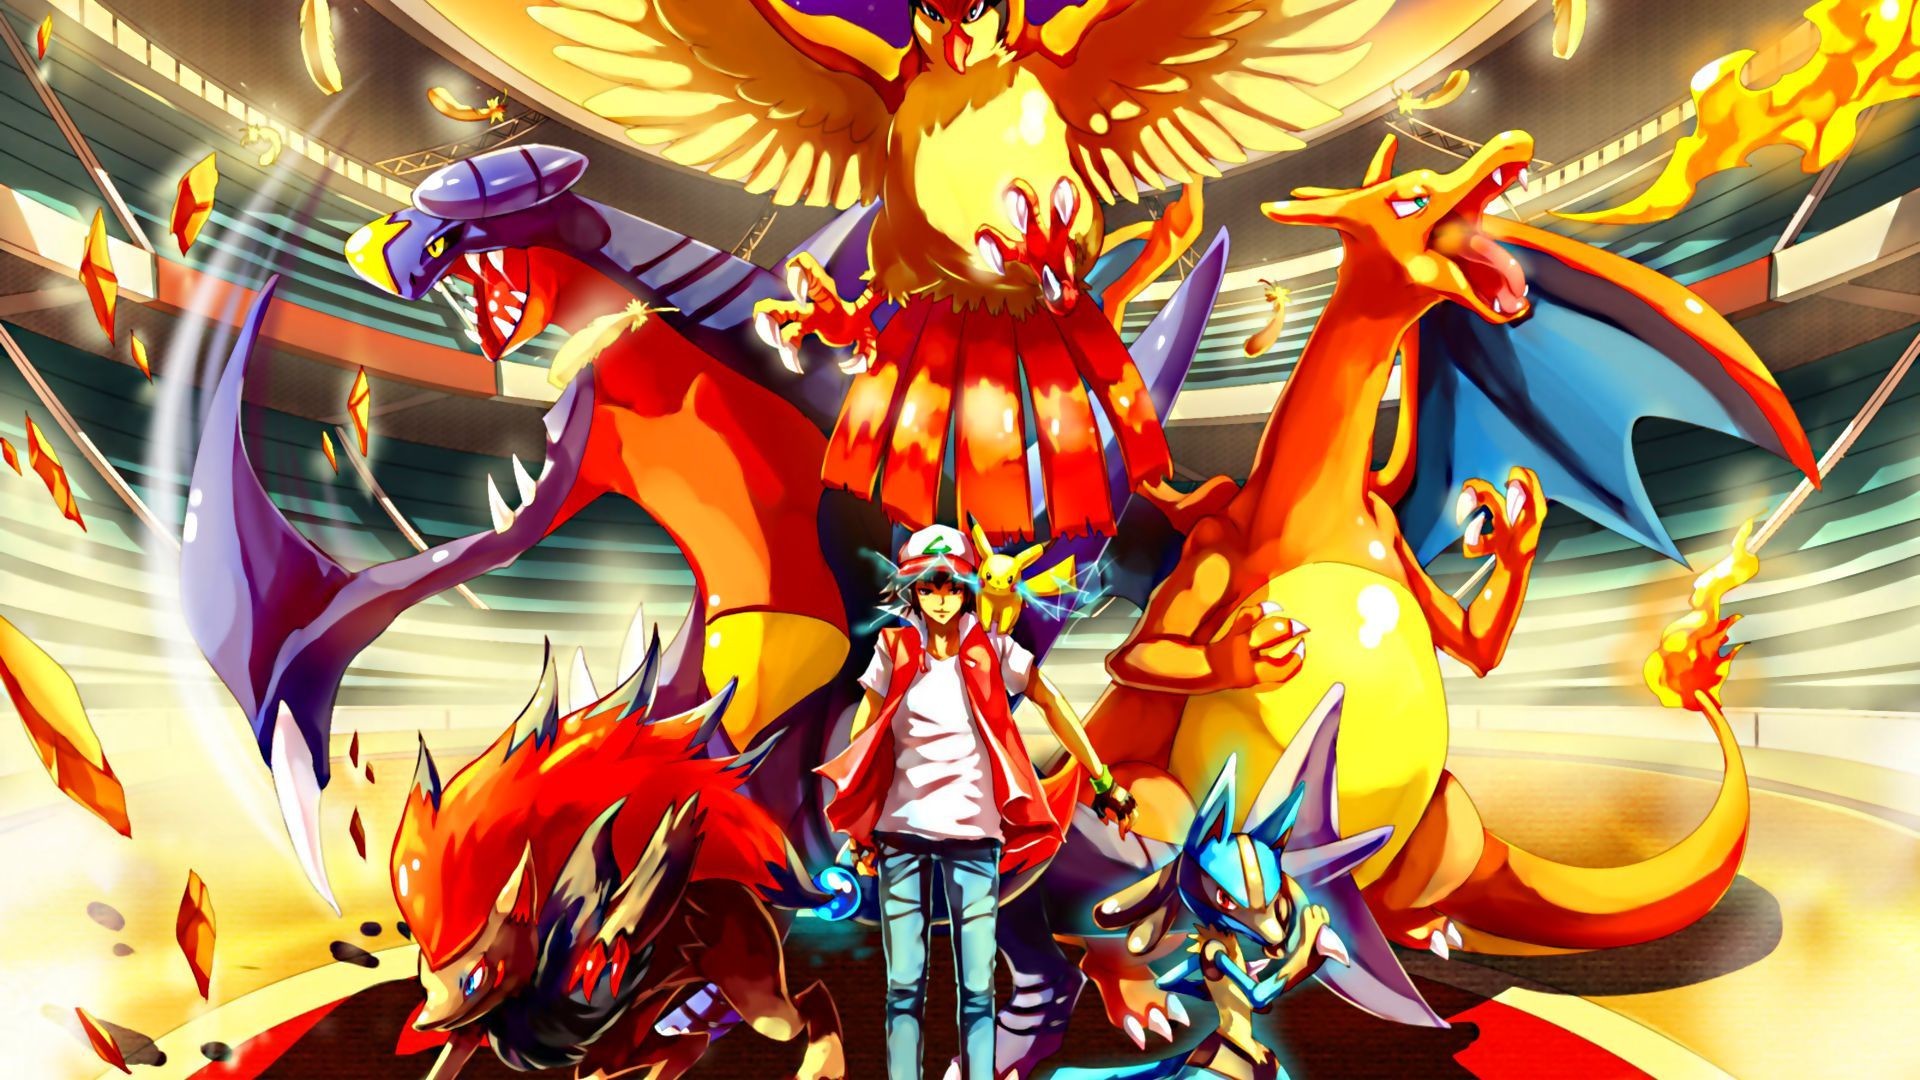 Free Download 71 Legendary Pokemon Wallpapers On Wallpaperplay 1920x1080 For Your Desktop Mobile Tablet Explore 53 Legendary Pokemon Phone Wallpapers Legendary Pokemon Phone Wallpapers Pokemon Legendary Wallpaper Legendary Pokemon Wallpaper